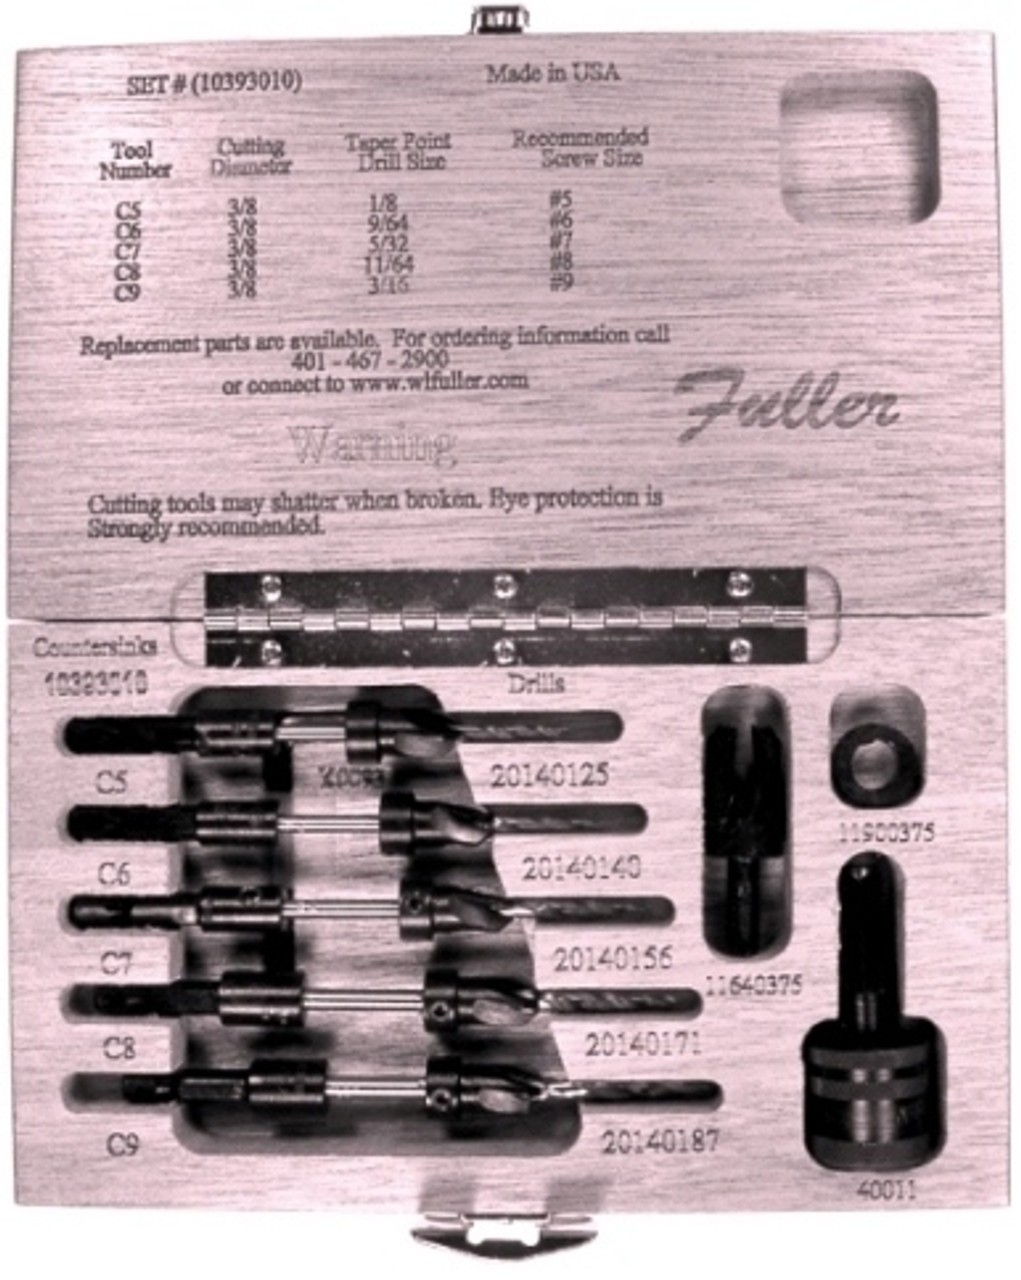 WL Fuller 10393010 Quick Release Type C Combination Countersink and Taper Point Drill Set